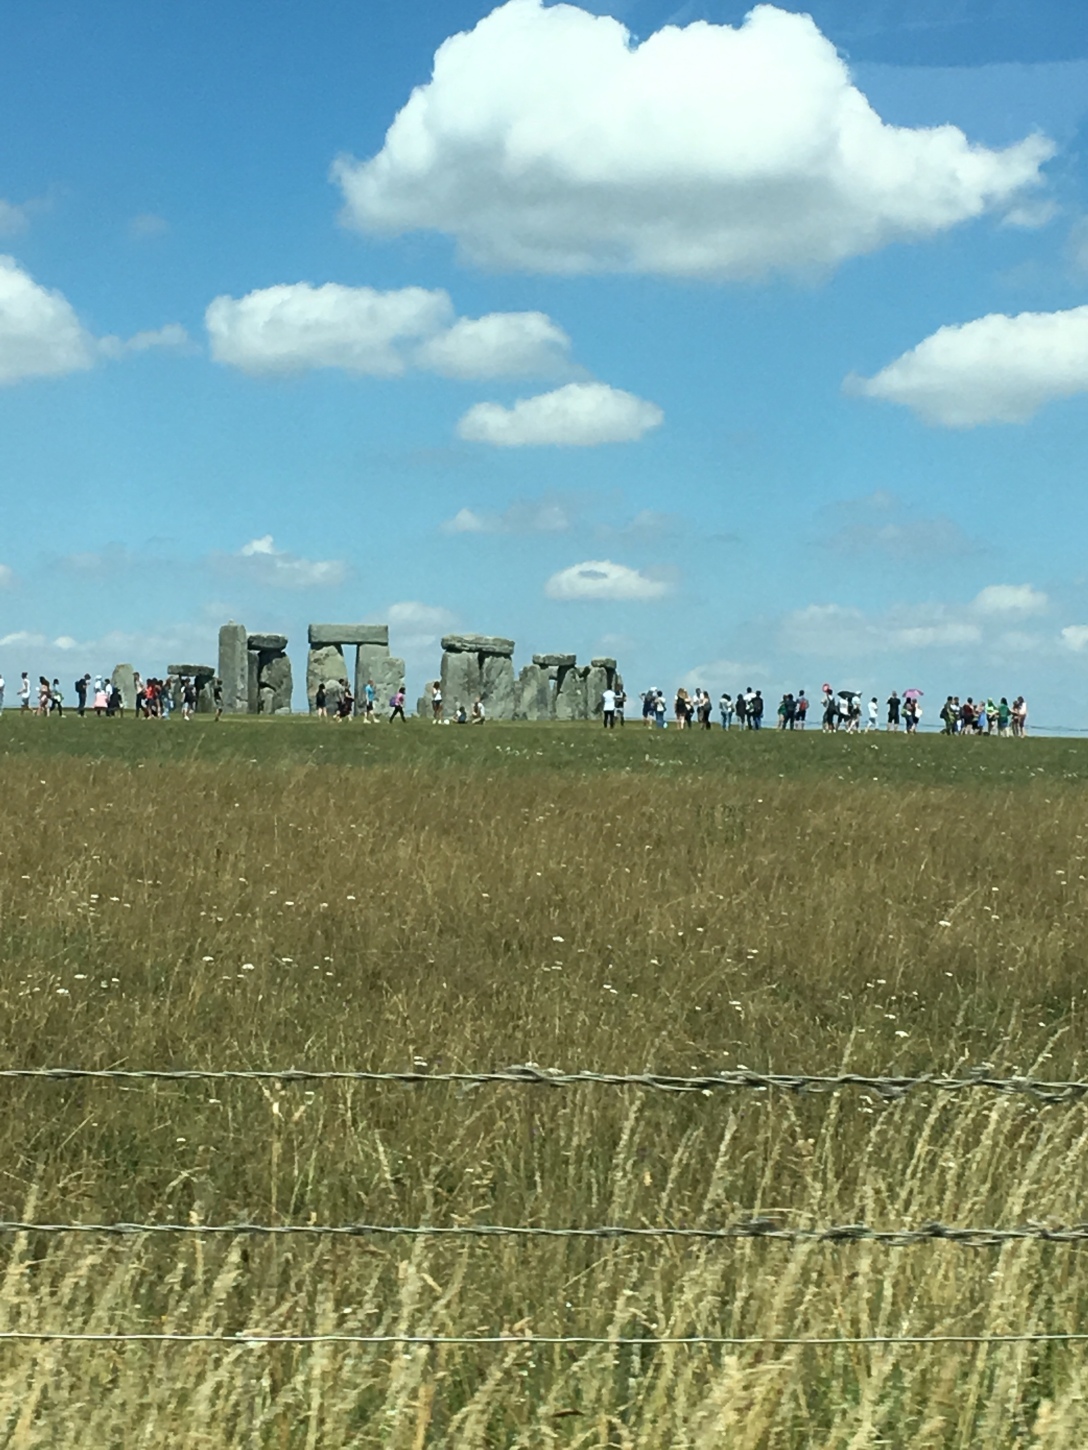 The image is a photo of Stonehenge taken from a car driving on the A303. The ancient stones can be seen in the near distance with faded green grass in the foreground and a blue sky with white clouds above.